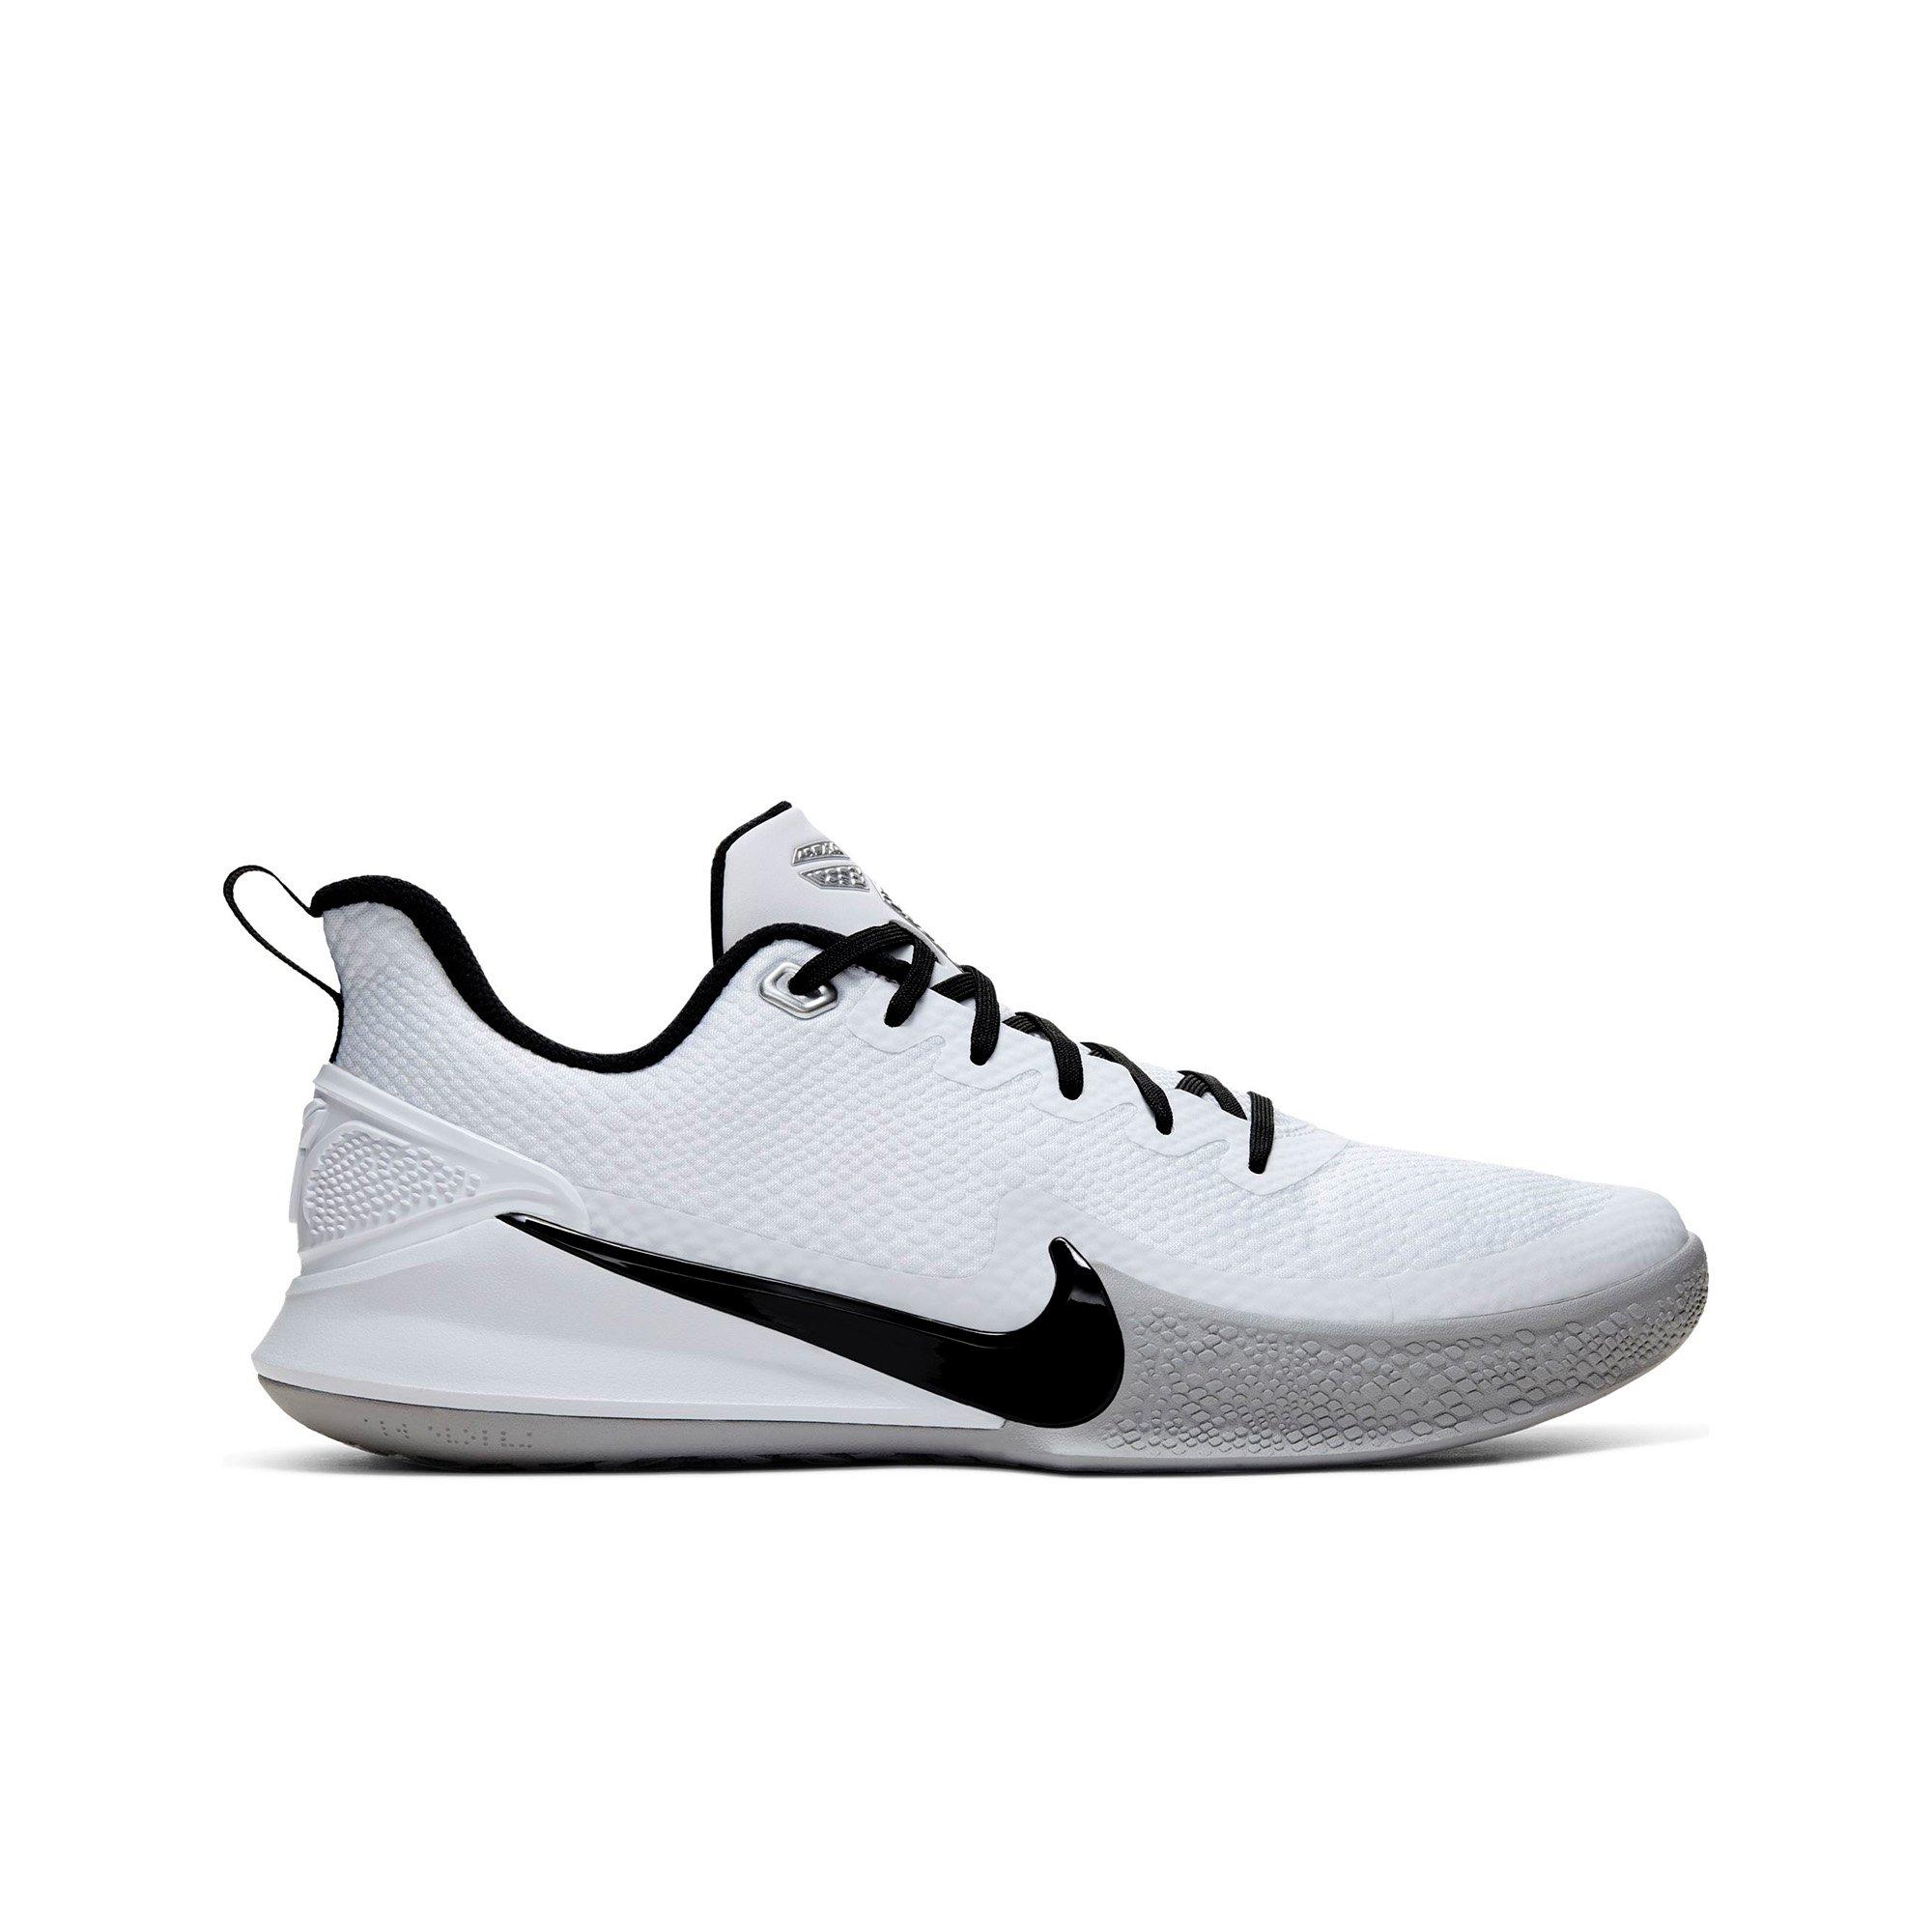 kobe volleyball shoes womens